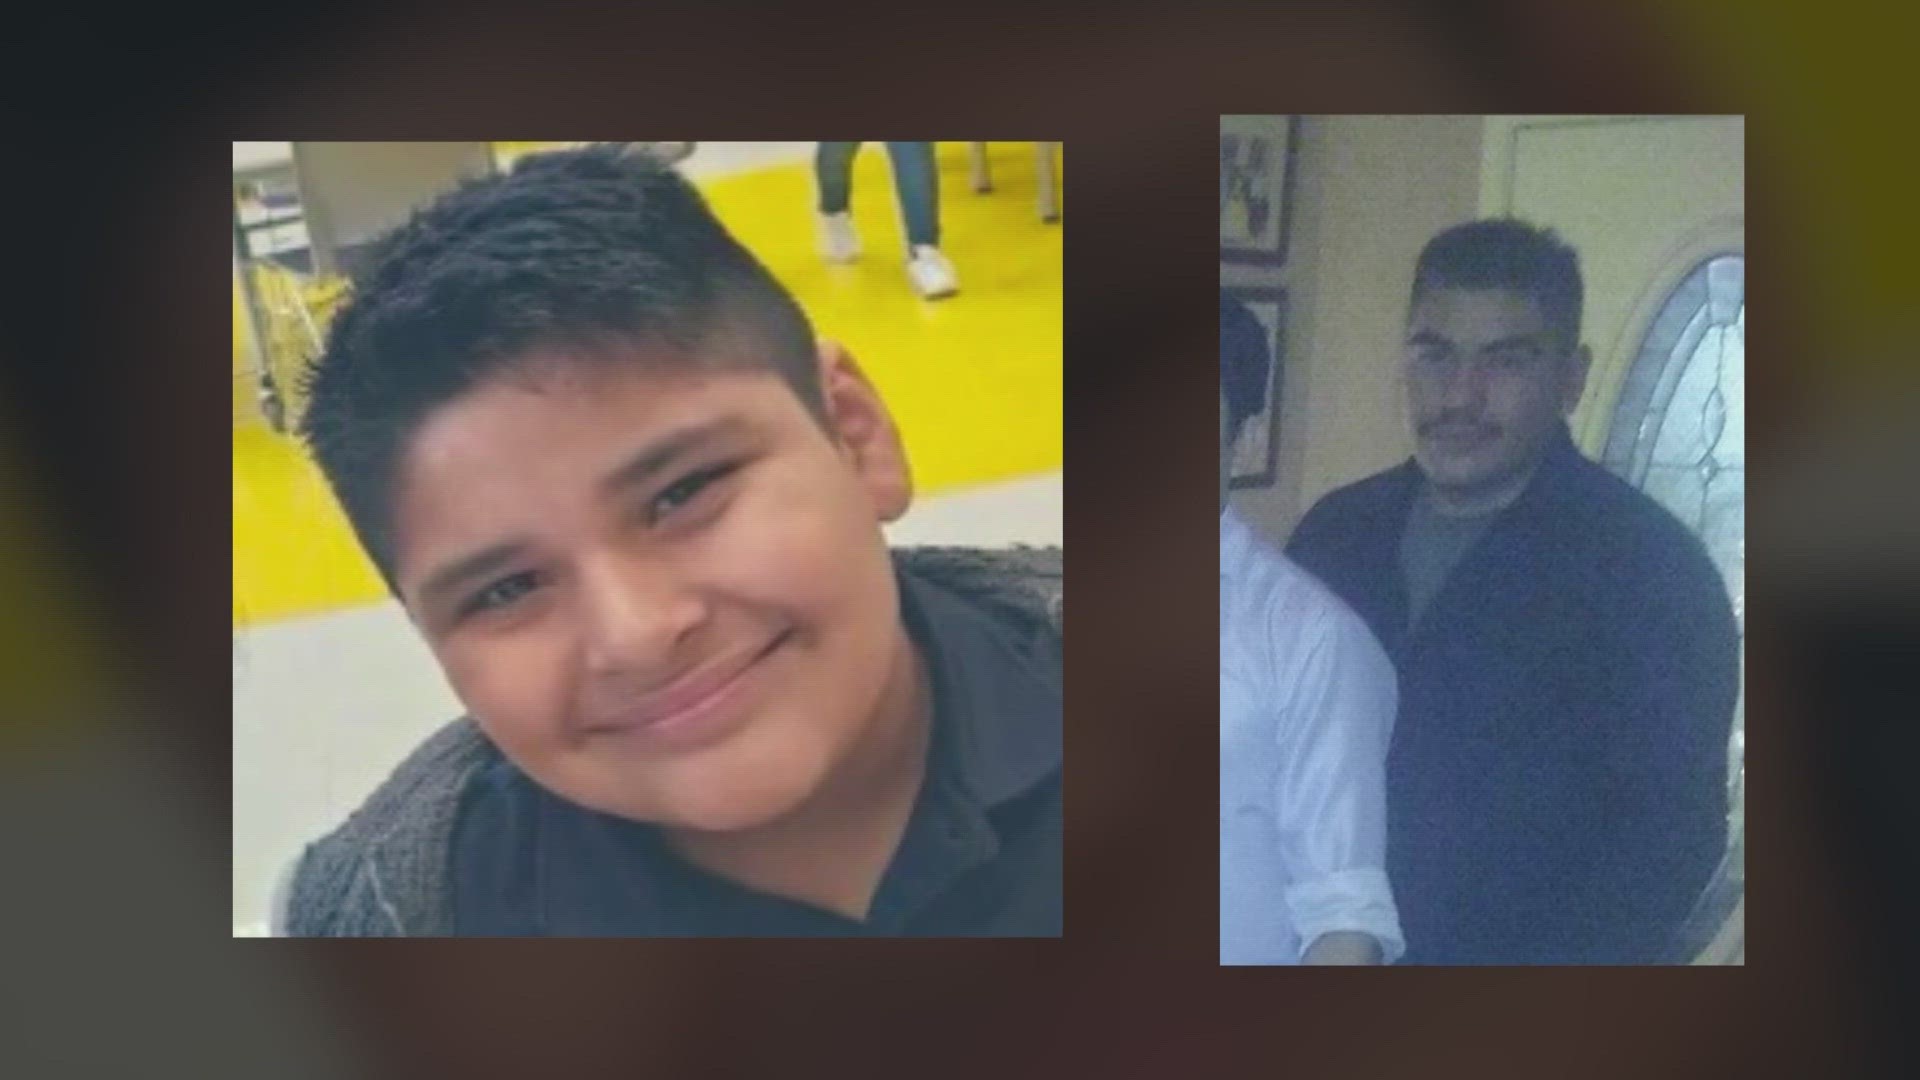 The Wilmer Police Department said Friday they have "reason to believe" that 10-year-old Ian Aguilar is now with family in Mexico.